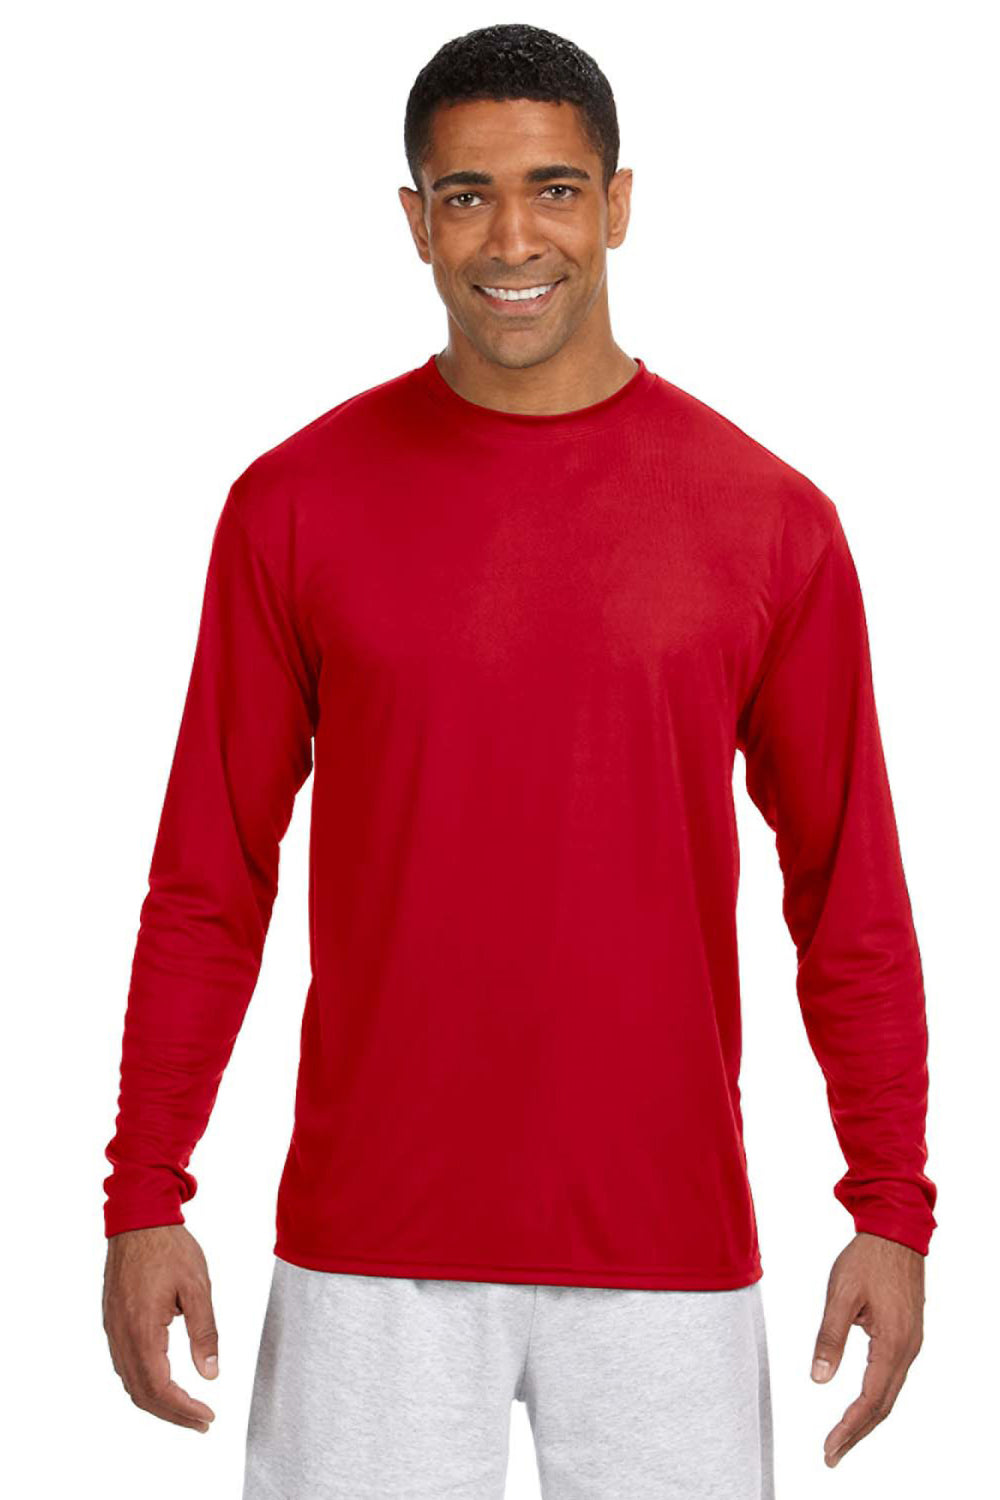 A4 N3165 Mens Performance Moisture Wicking Long Sleeve Crewneck T-Shirt Scarlet Red Model Front